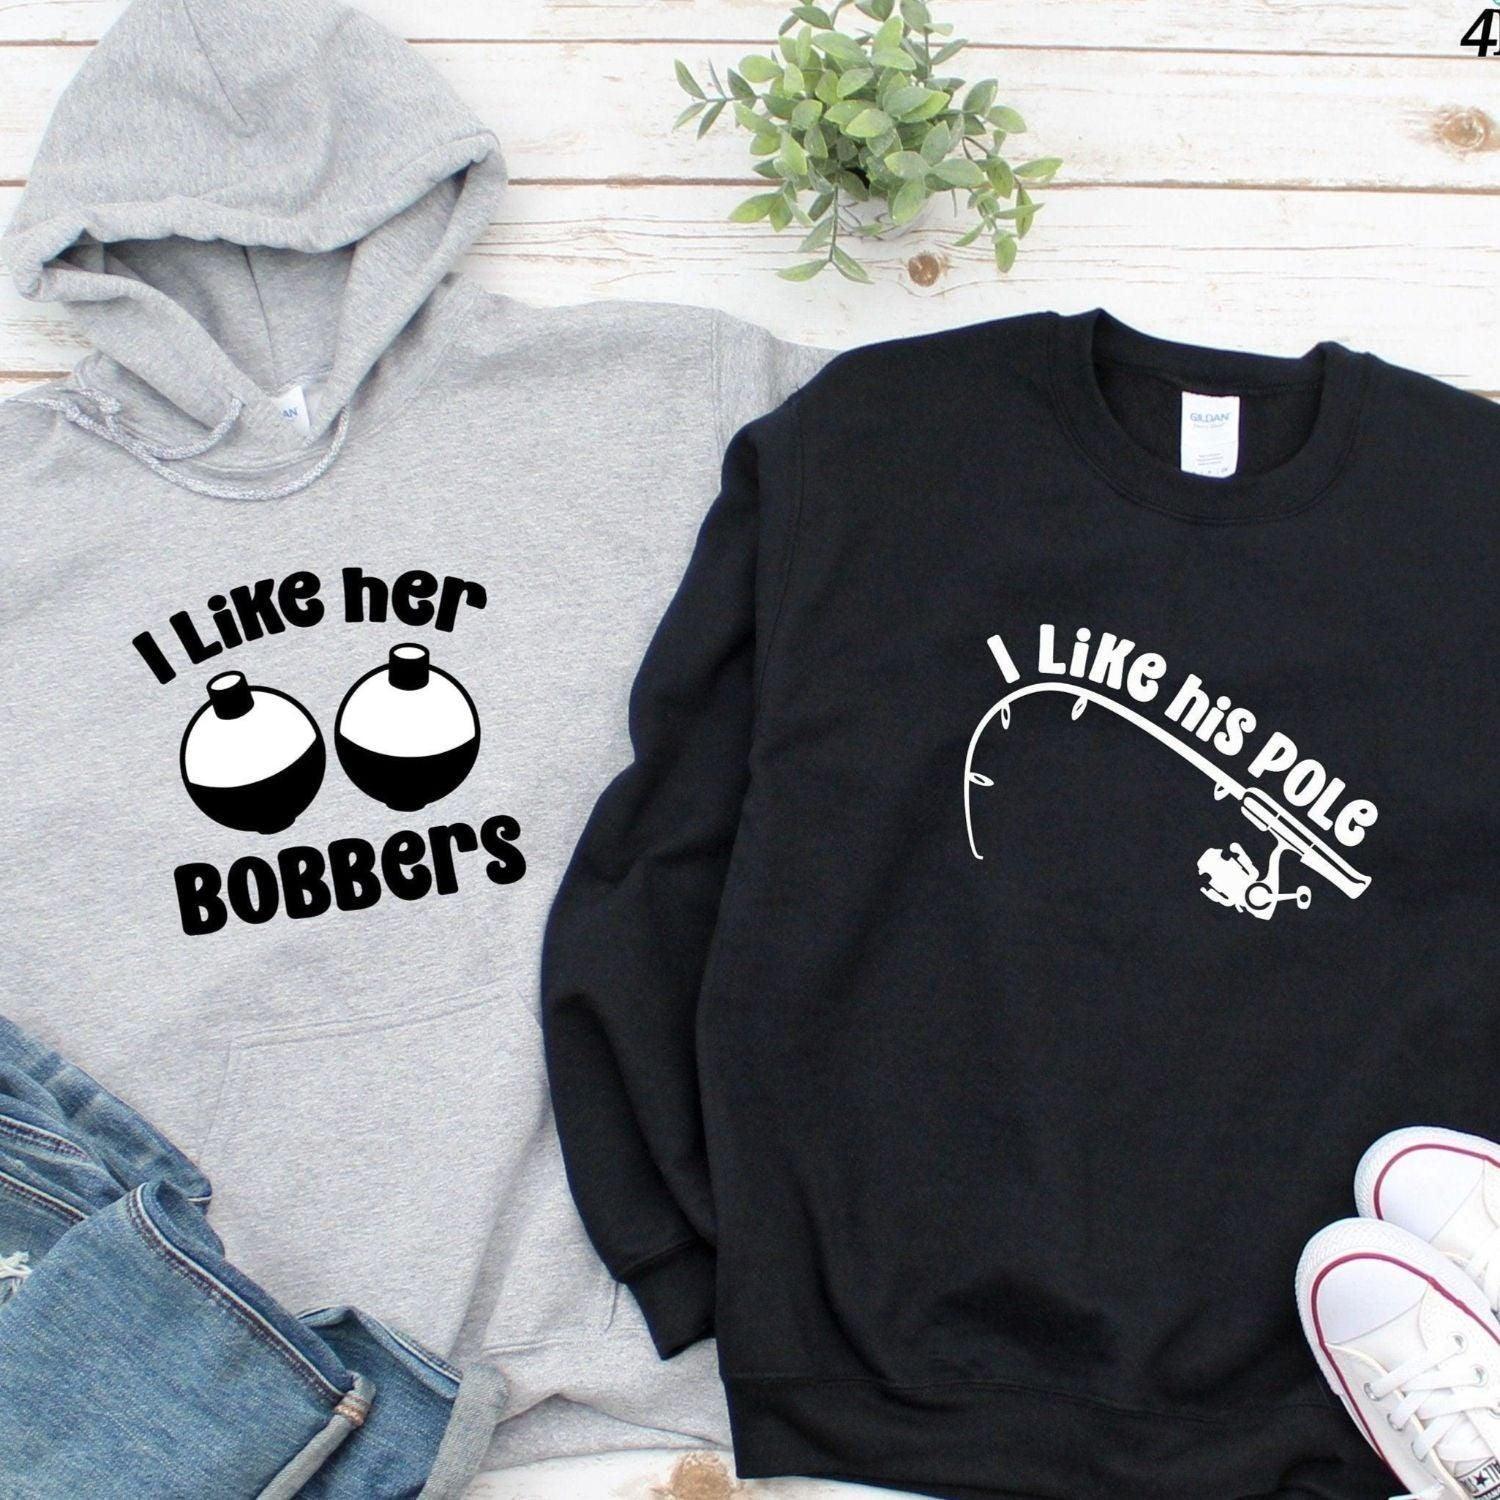 Matching Set: I Like Her Bobbers His Pole T-Shirt - Funny Couples Gift for Valentine's Day - 4Lovebirds